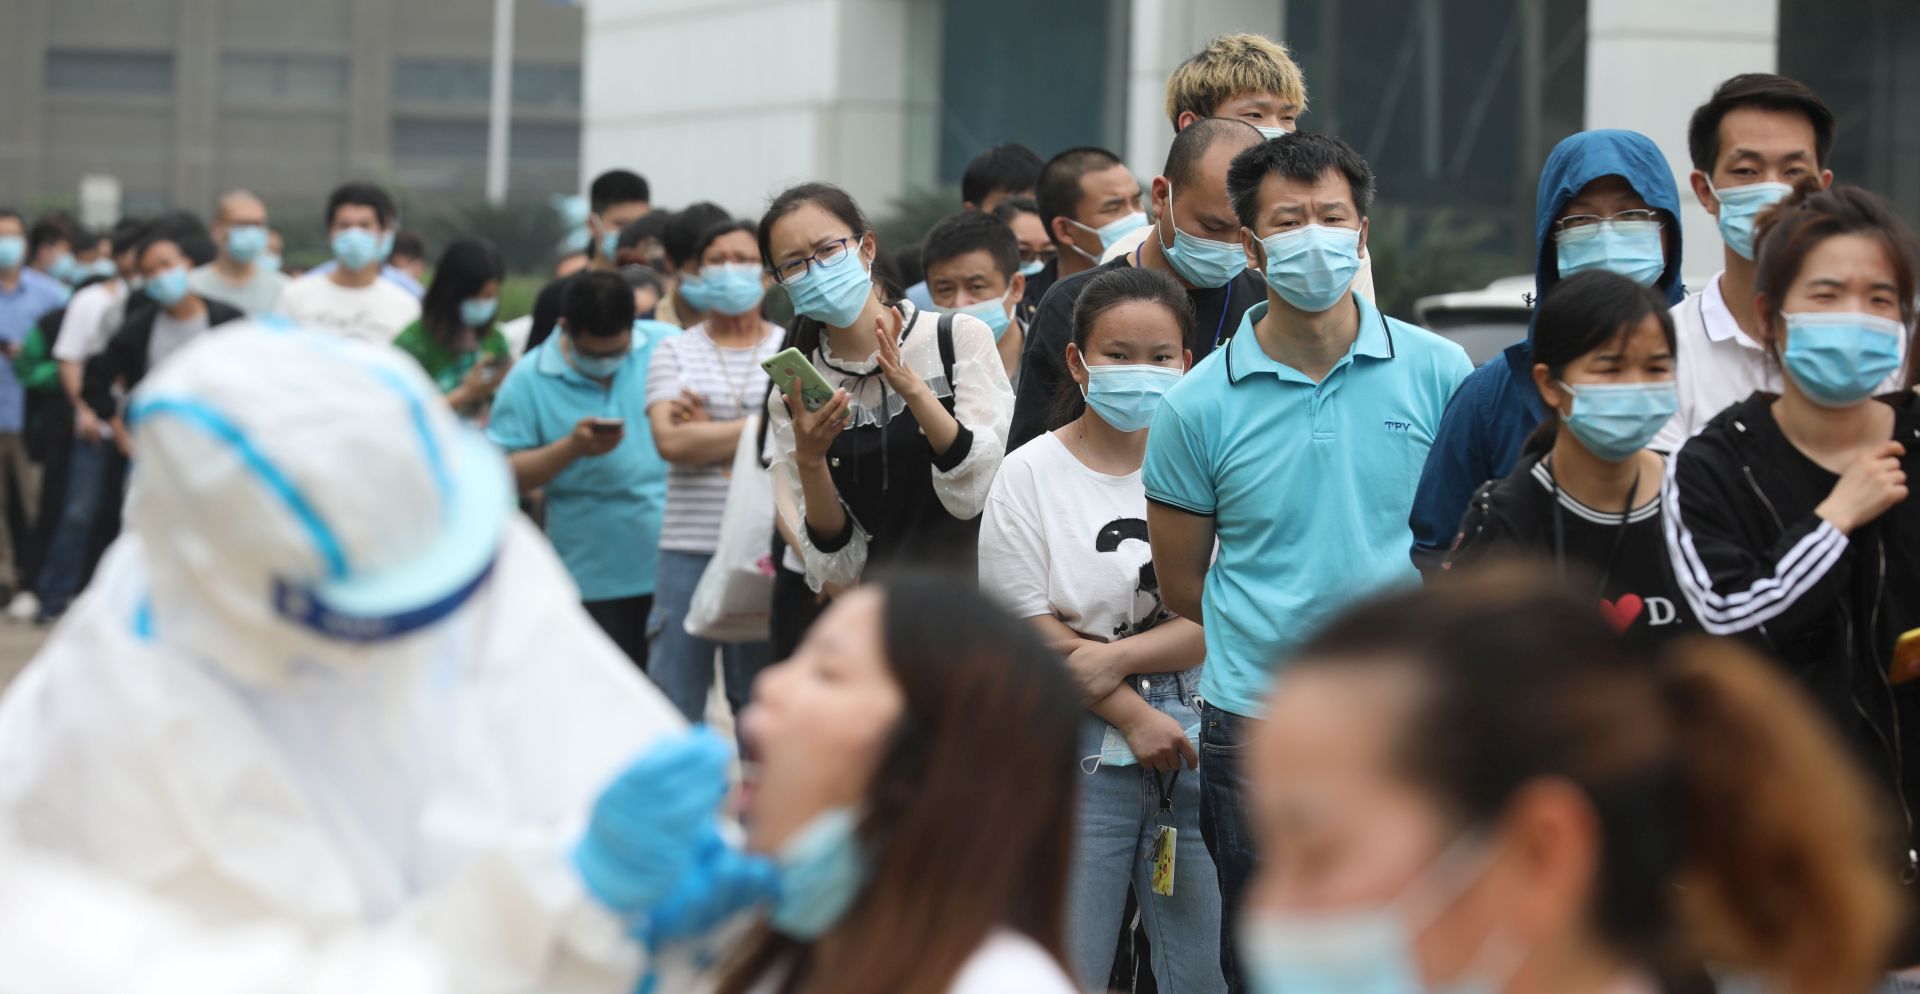 epa08423298 Workers queue for a coronavirus test at a factory in Wuhan, China, 15 May 2020. The city plans to test all its citizens, over 10 million people, within the next 10 days.  EPA/LI KE CHINA OUT